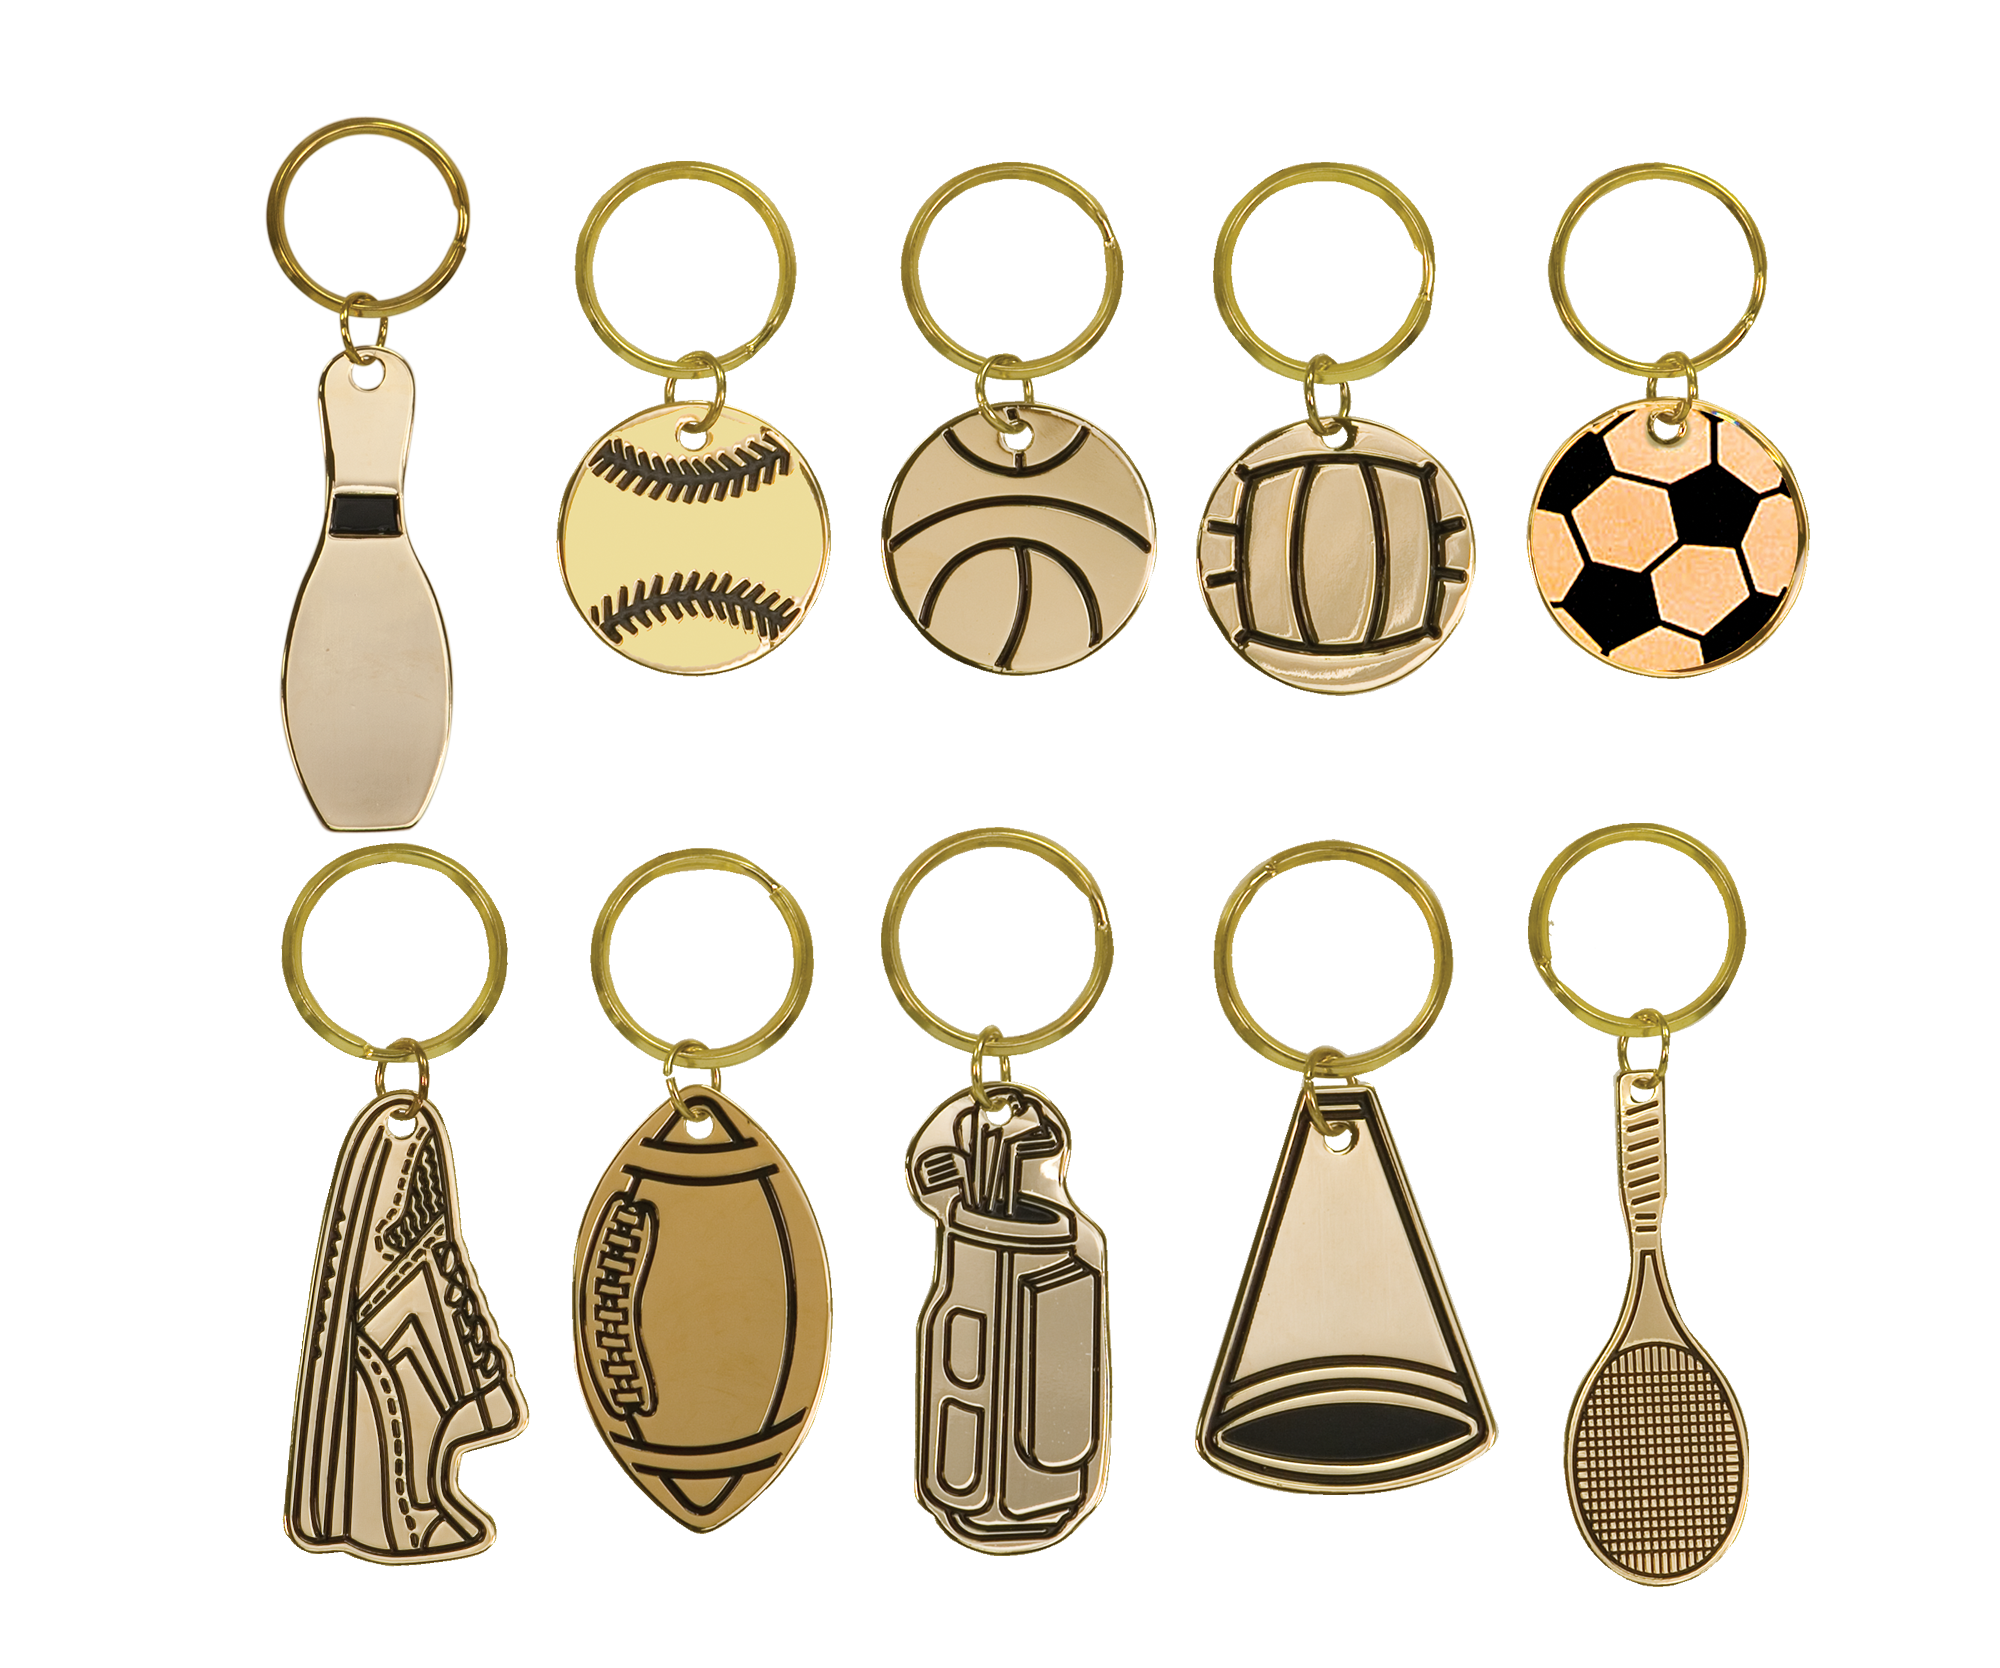 Sports themed keychains